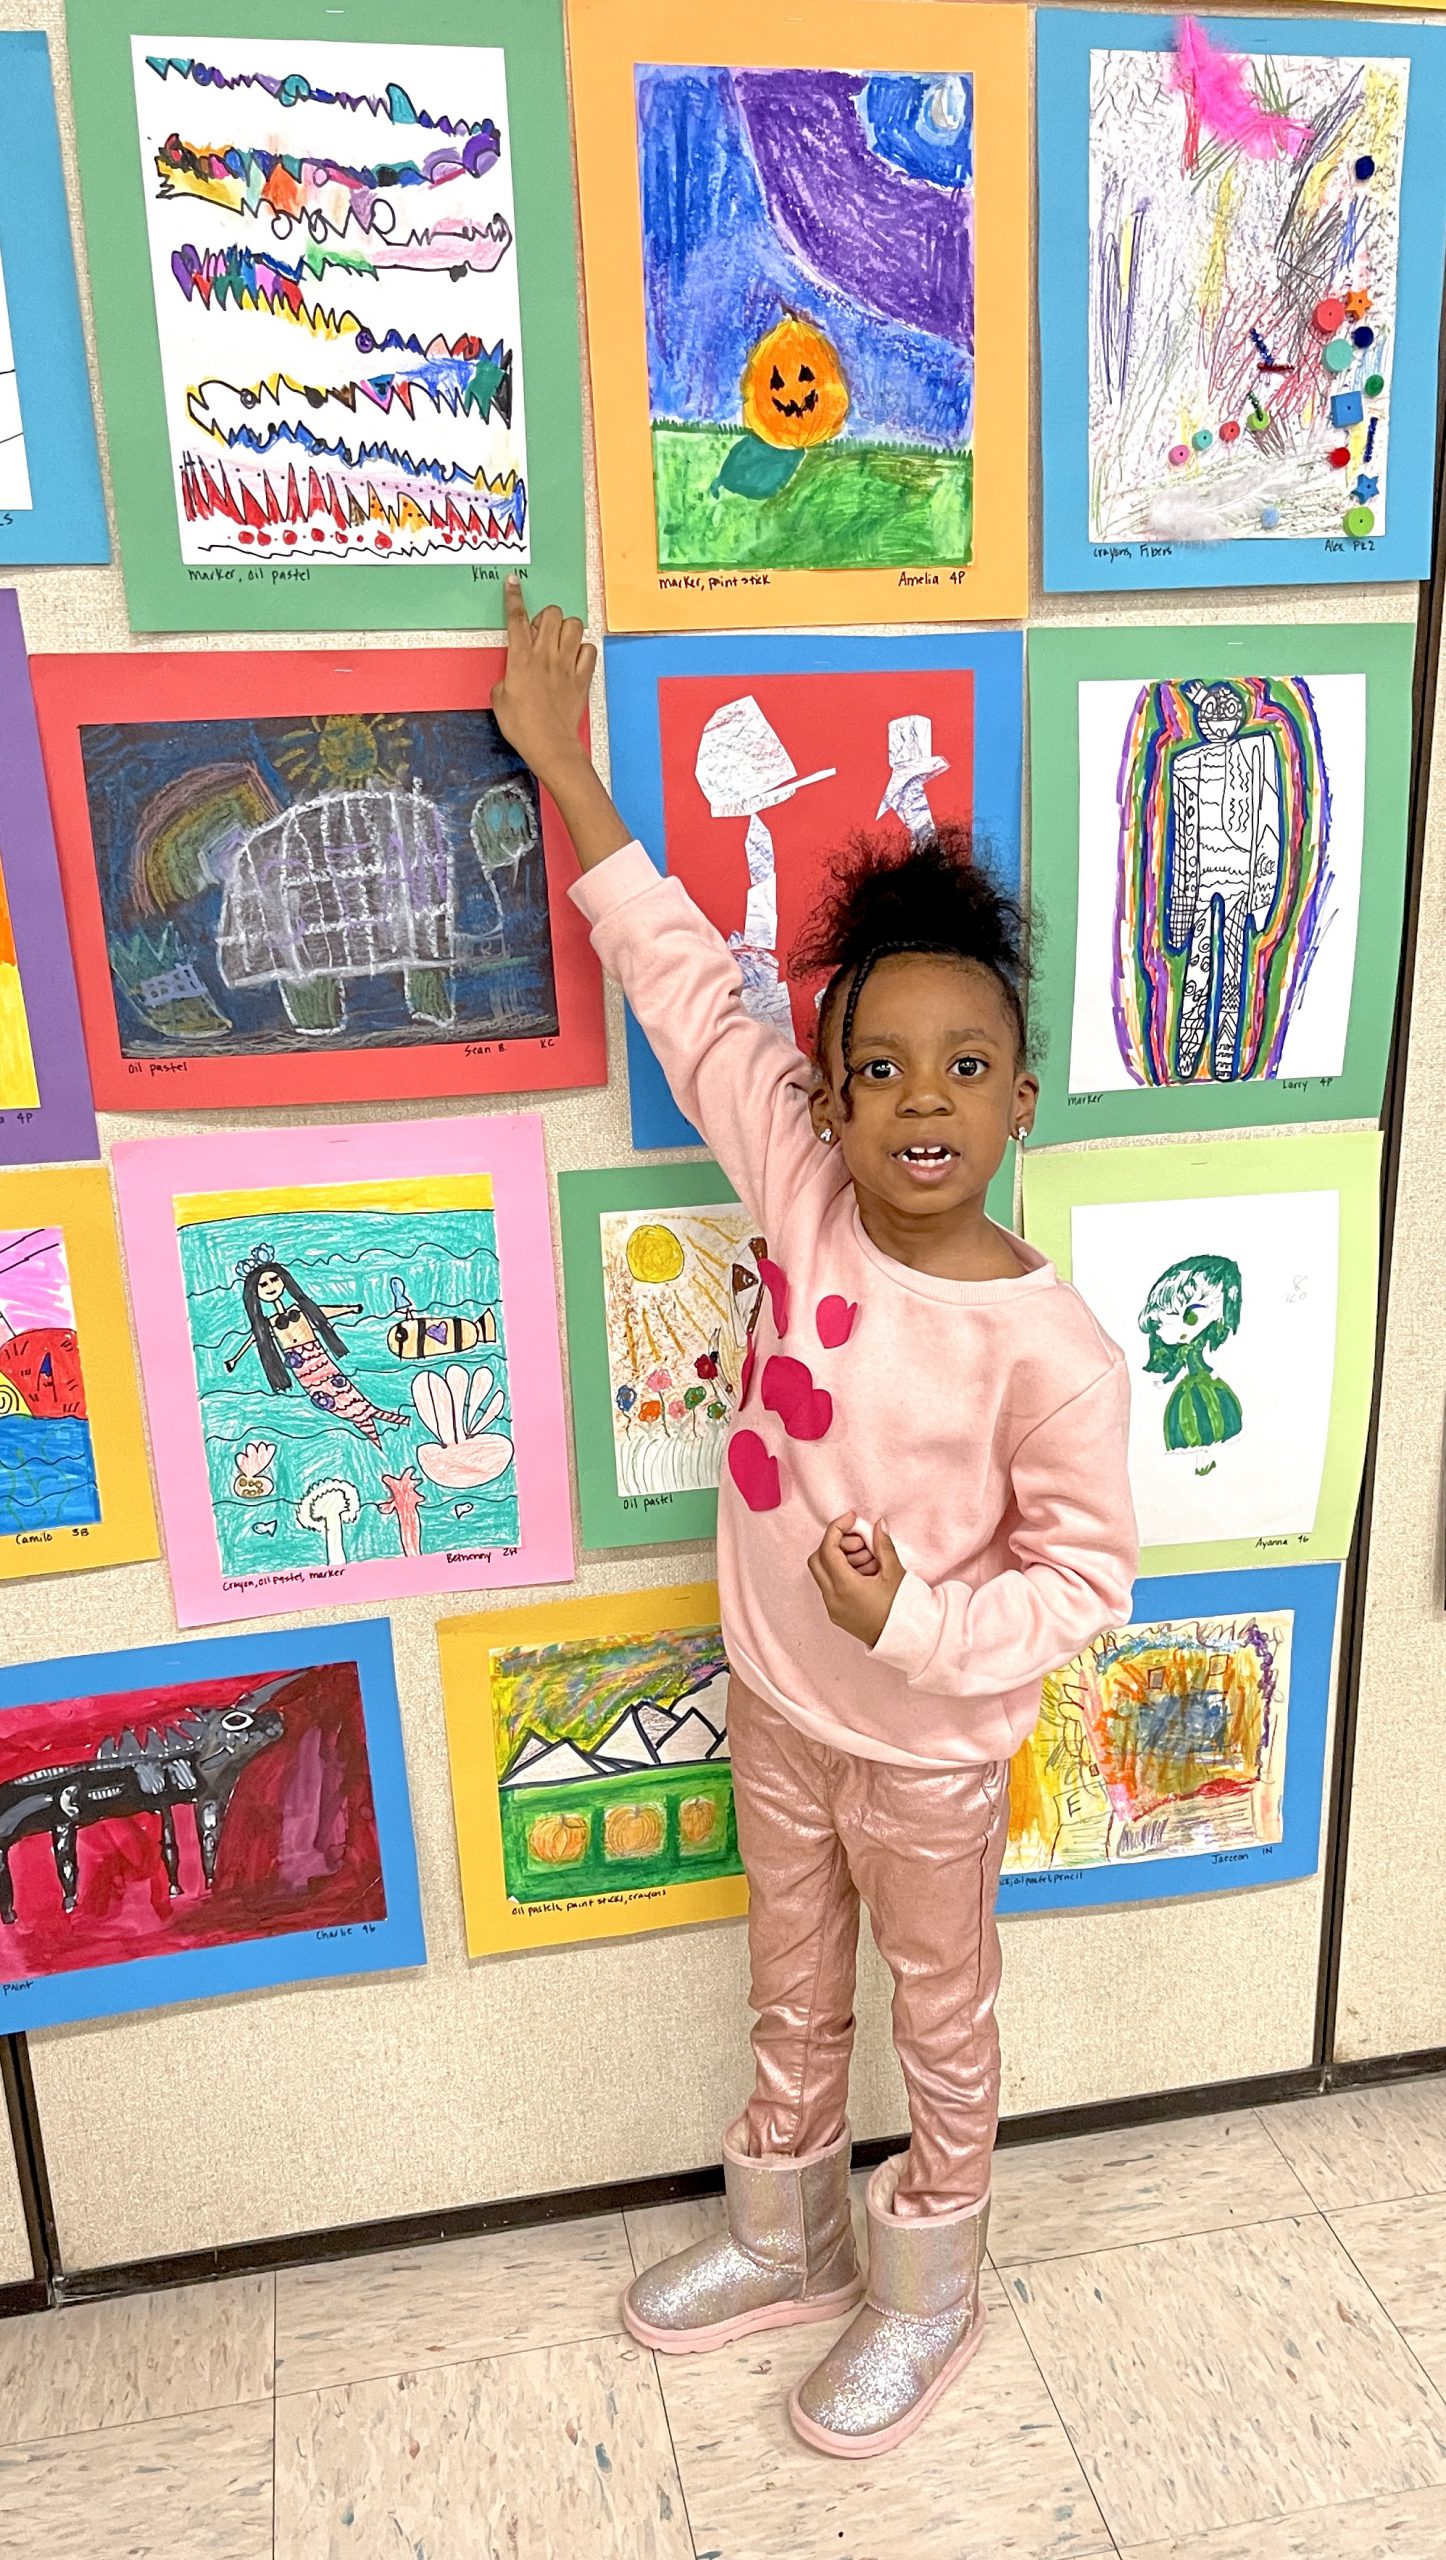 A little girl dressed in pink points to her artwork on the wall.